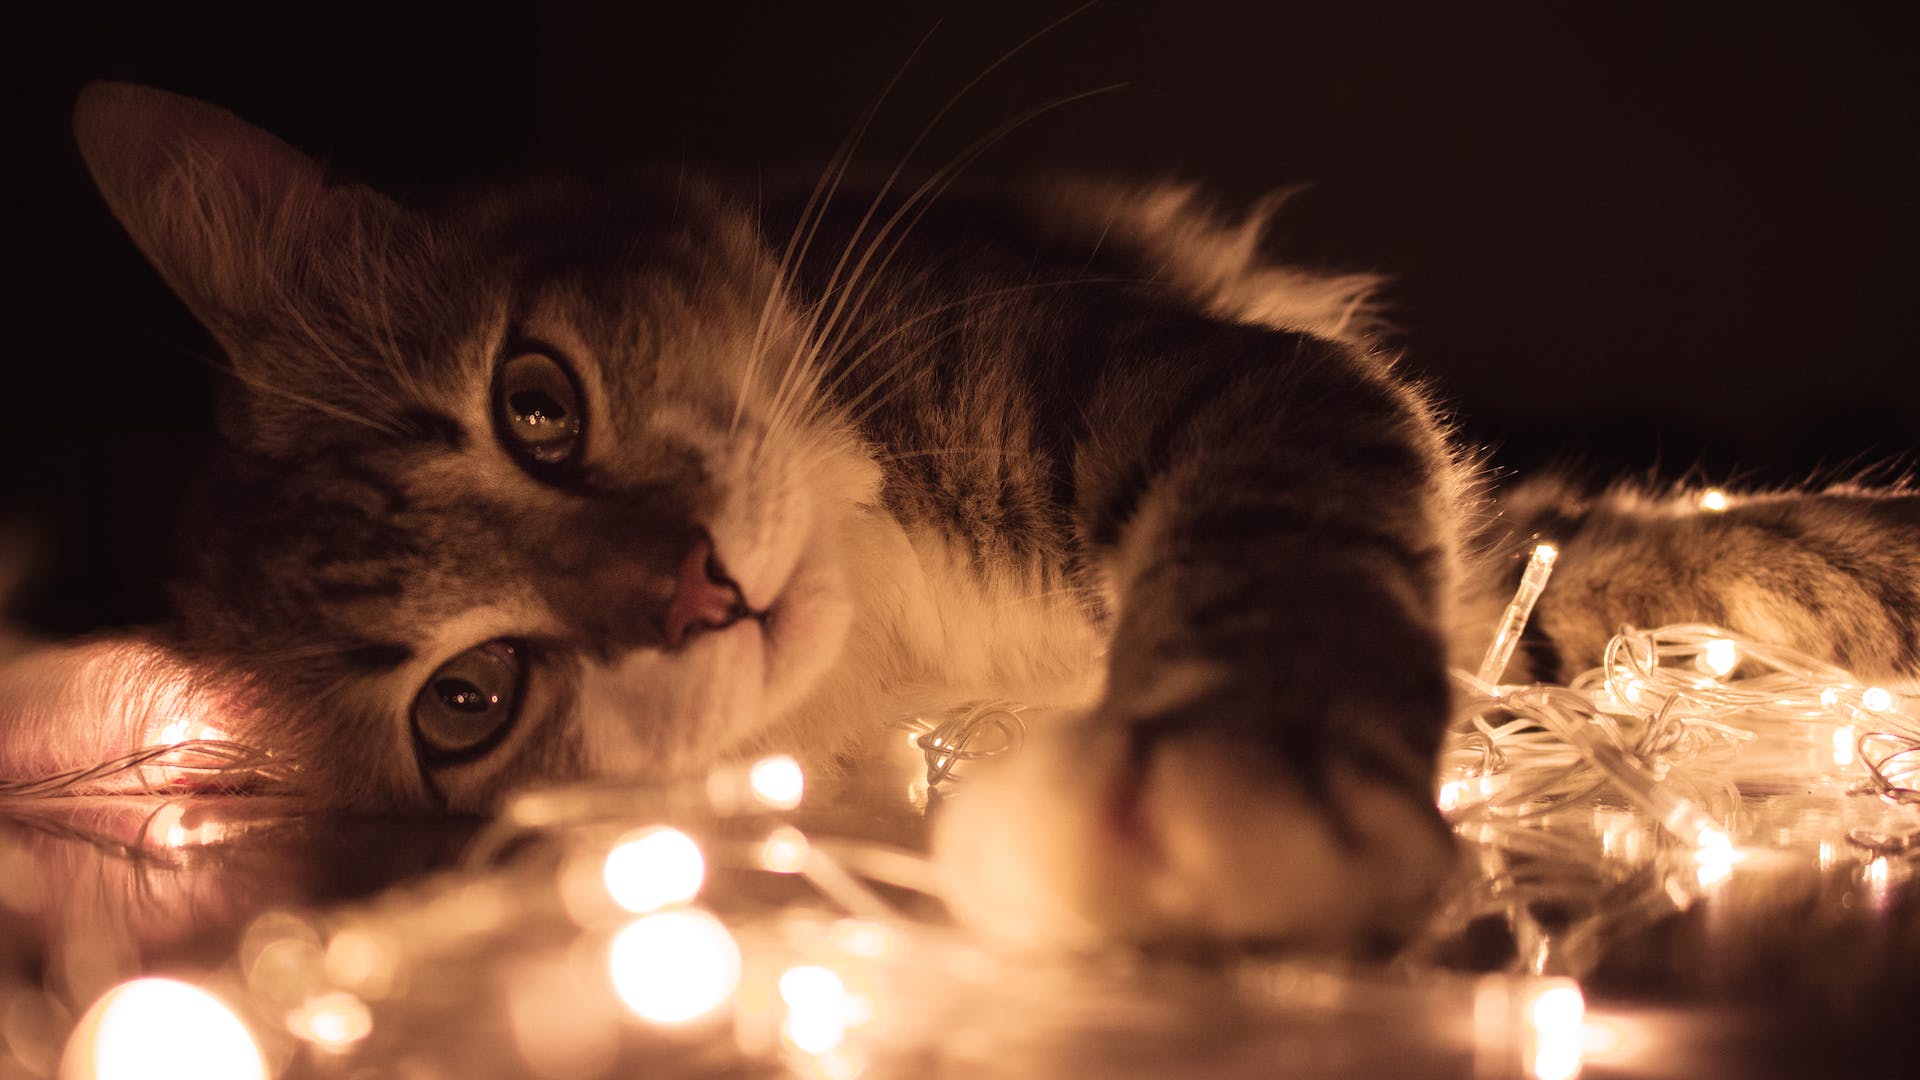 Cat playing with string lights | Source: Pexels